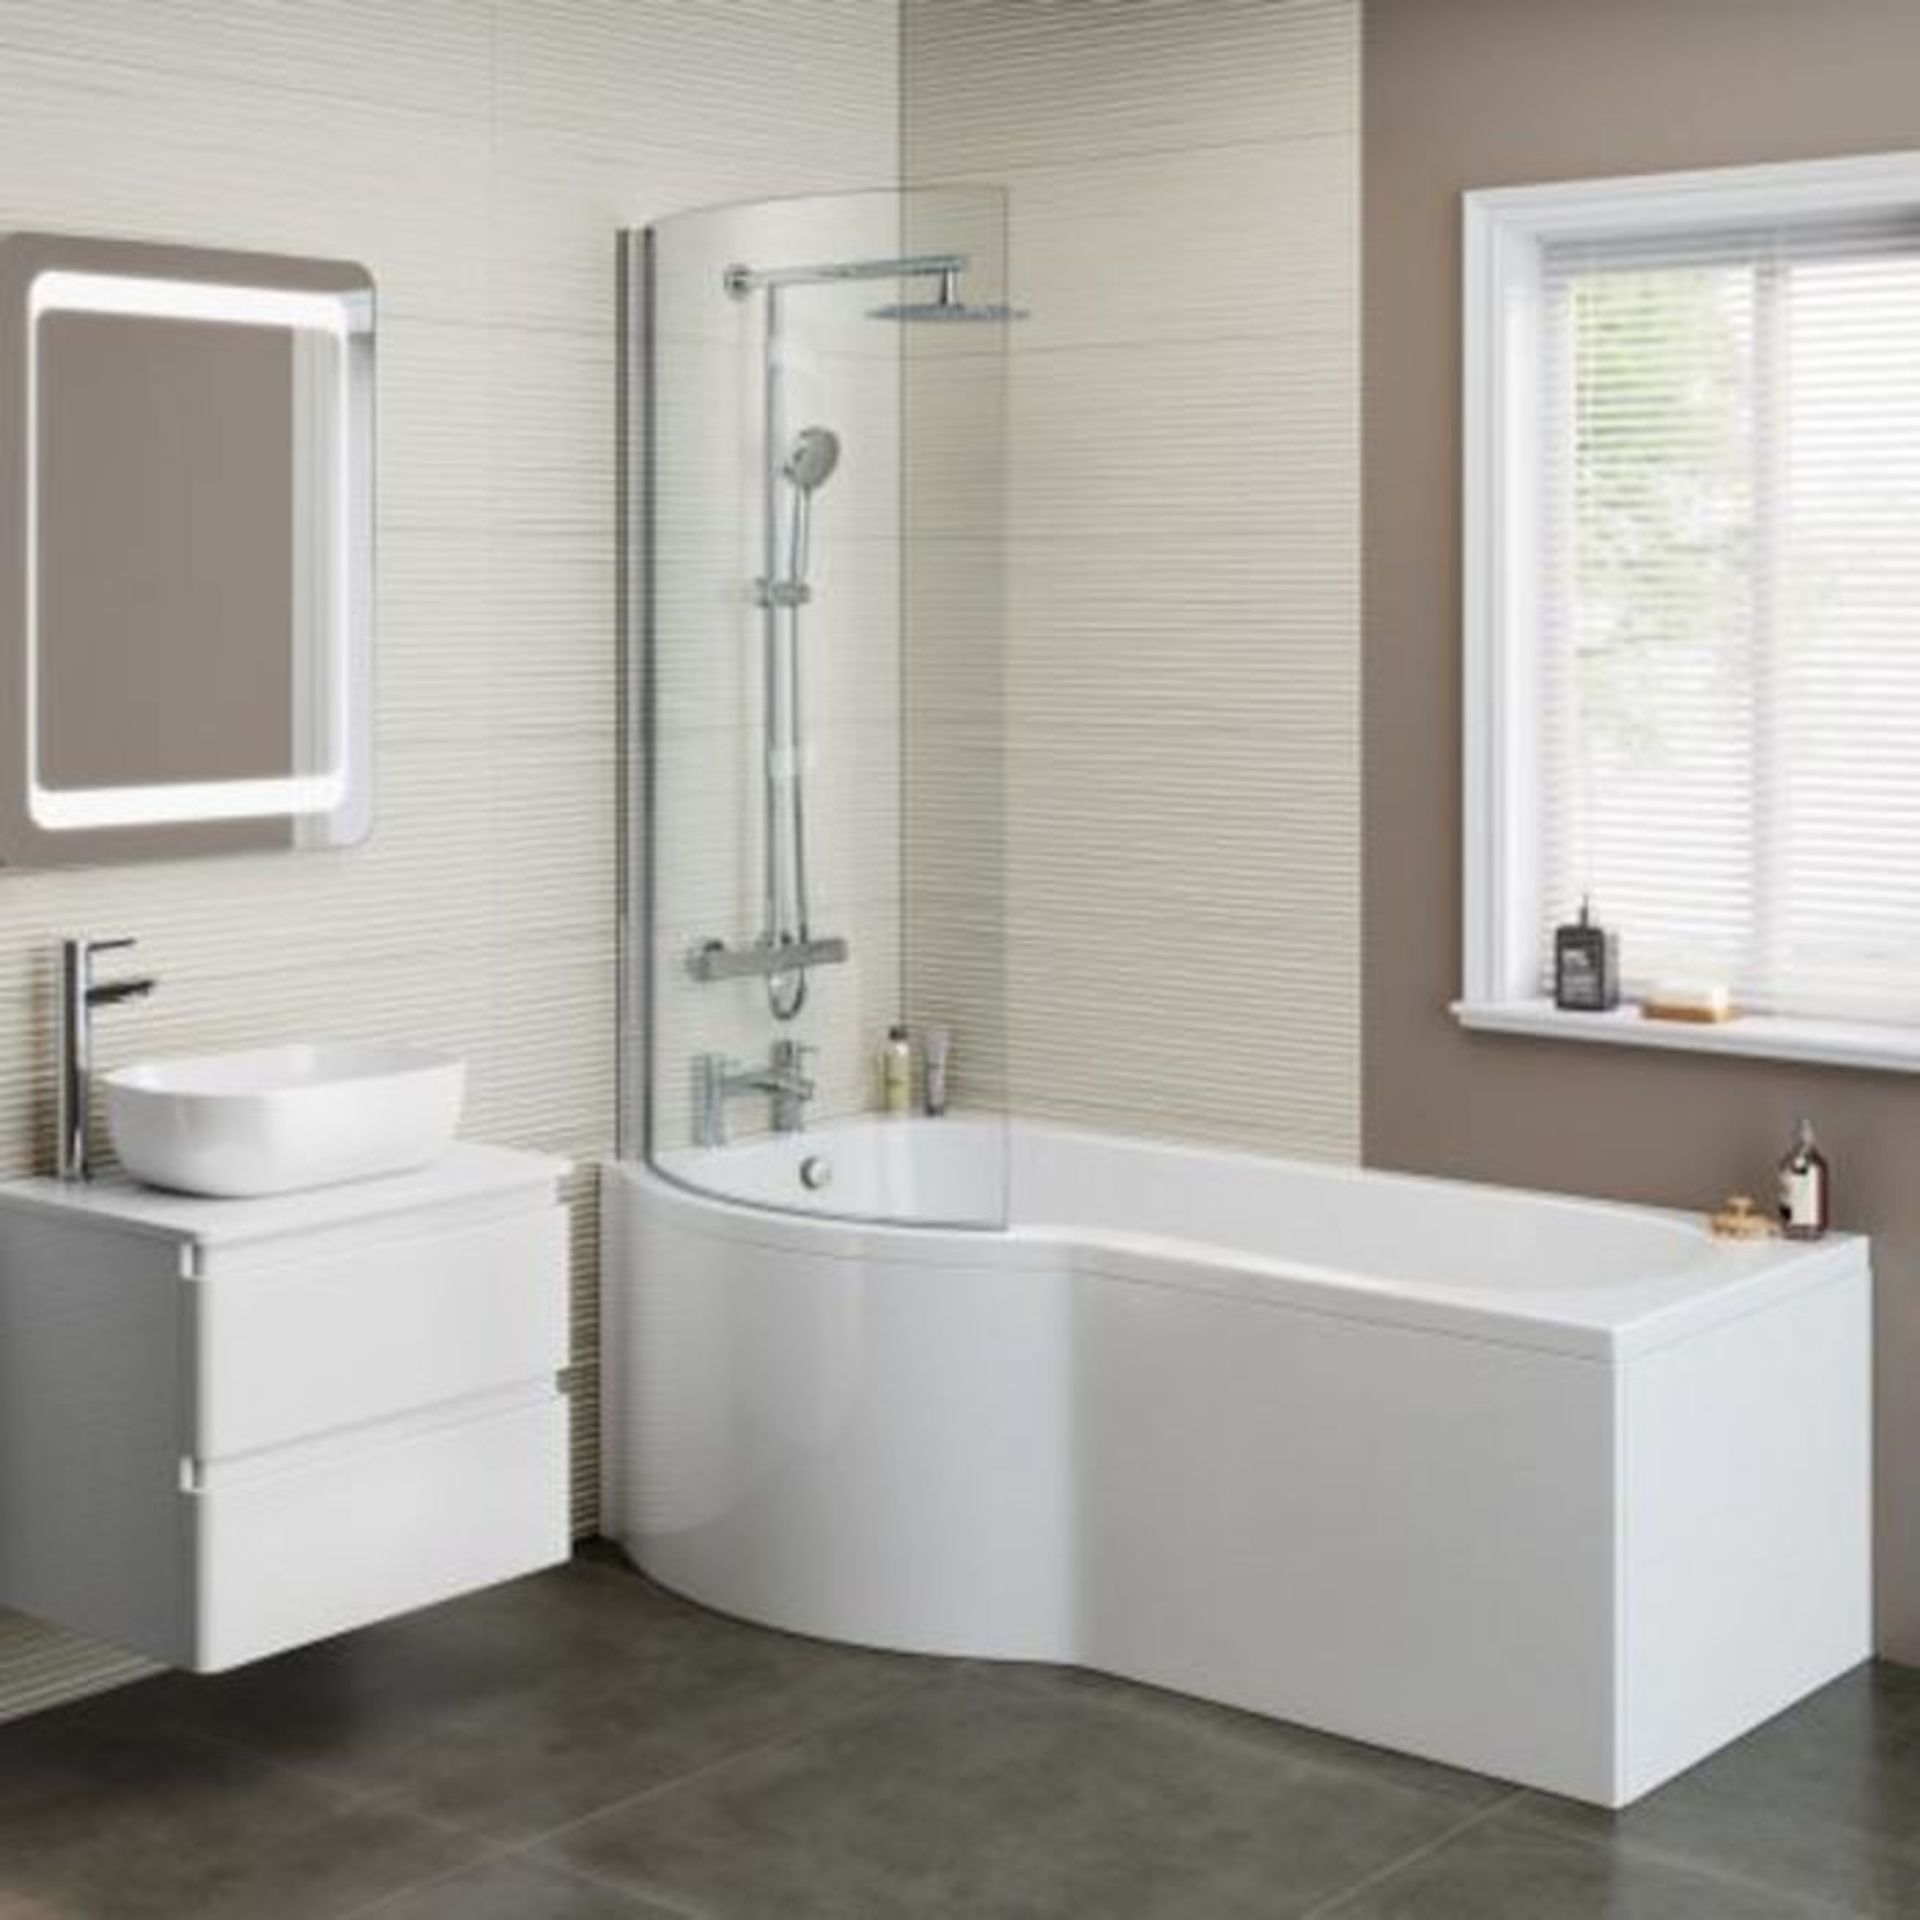 (CT44) 1700x850mm - Left Hand P-Shaped Bath with Front Panel (Excludes End Panel). RRP £339.99. - Image 2 of 3